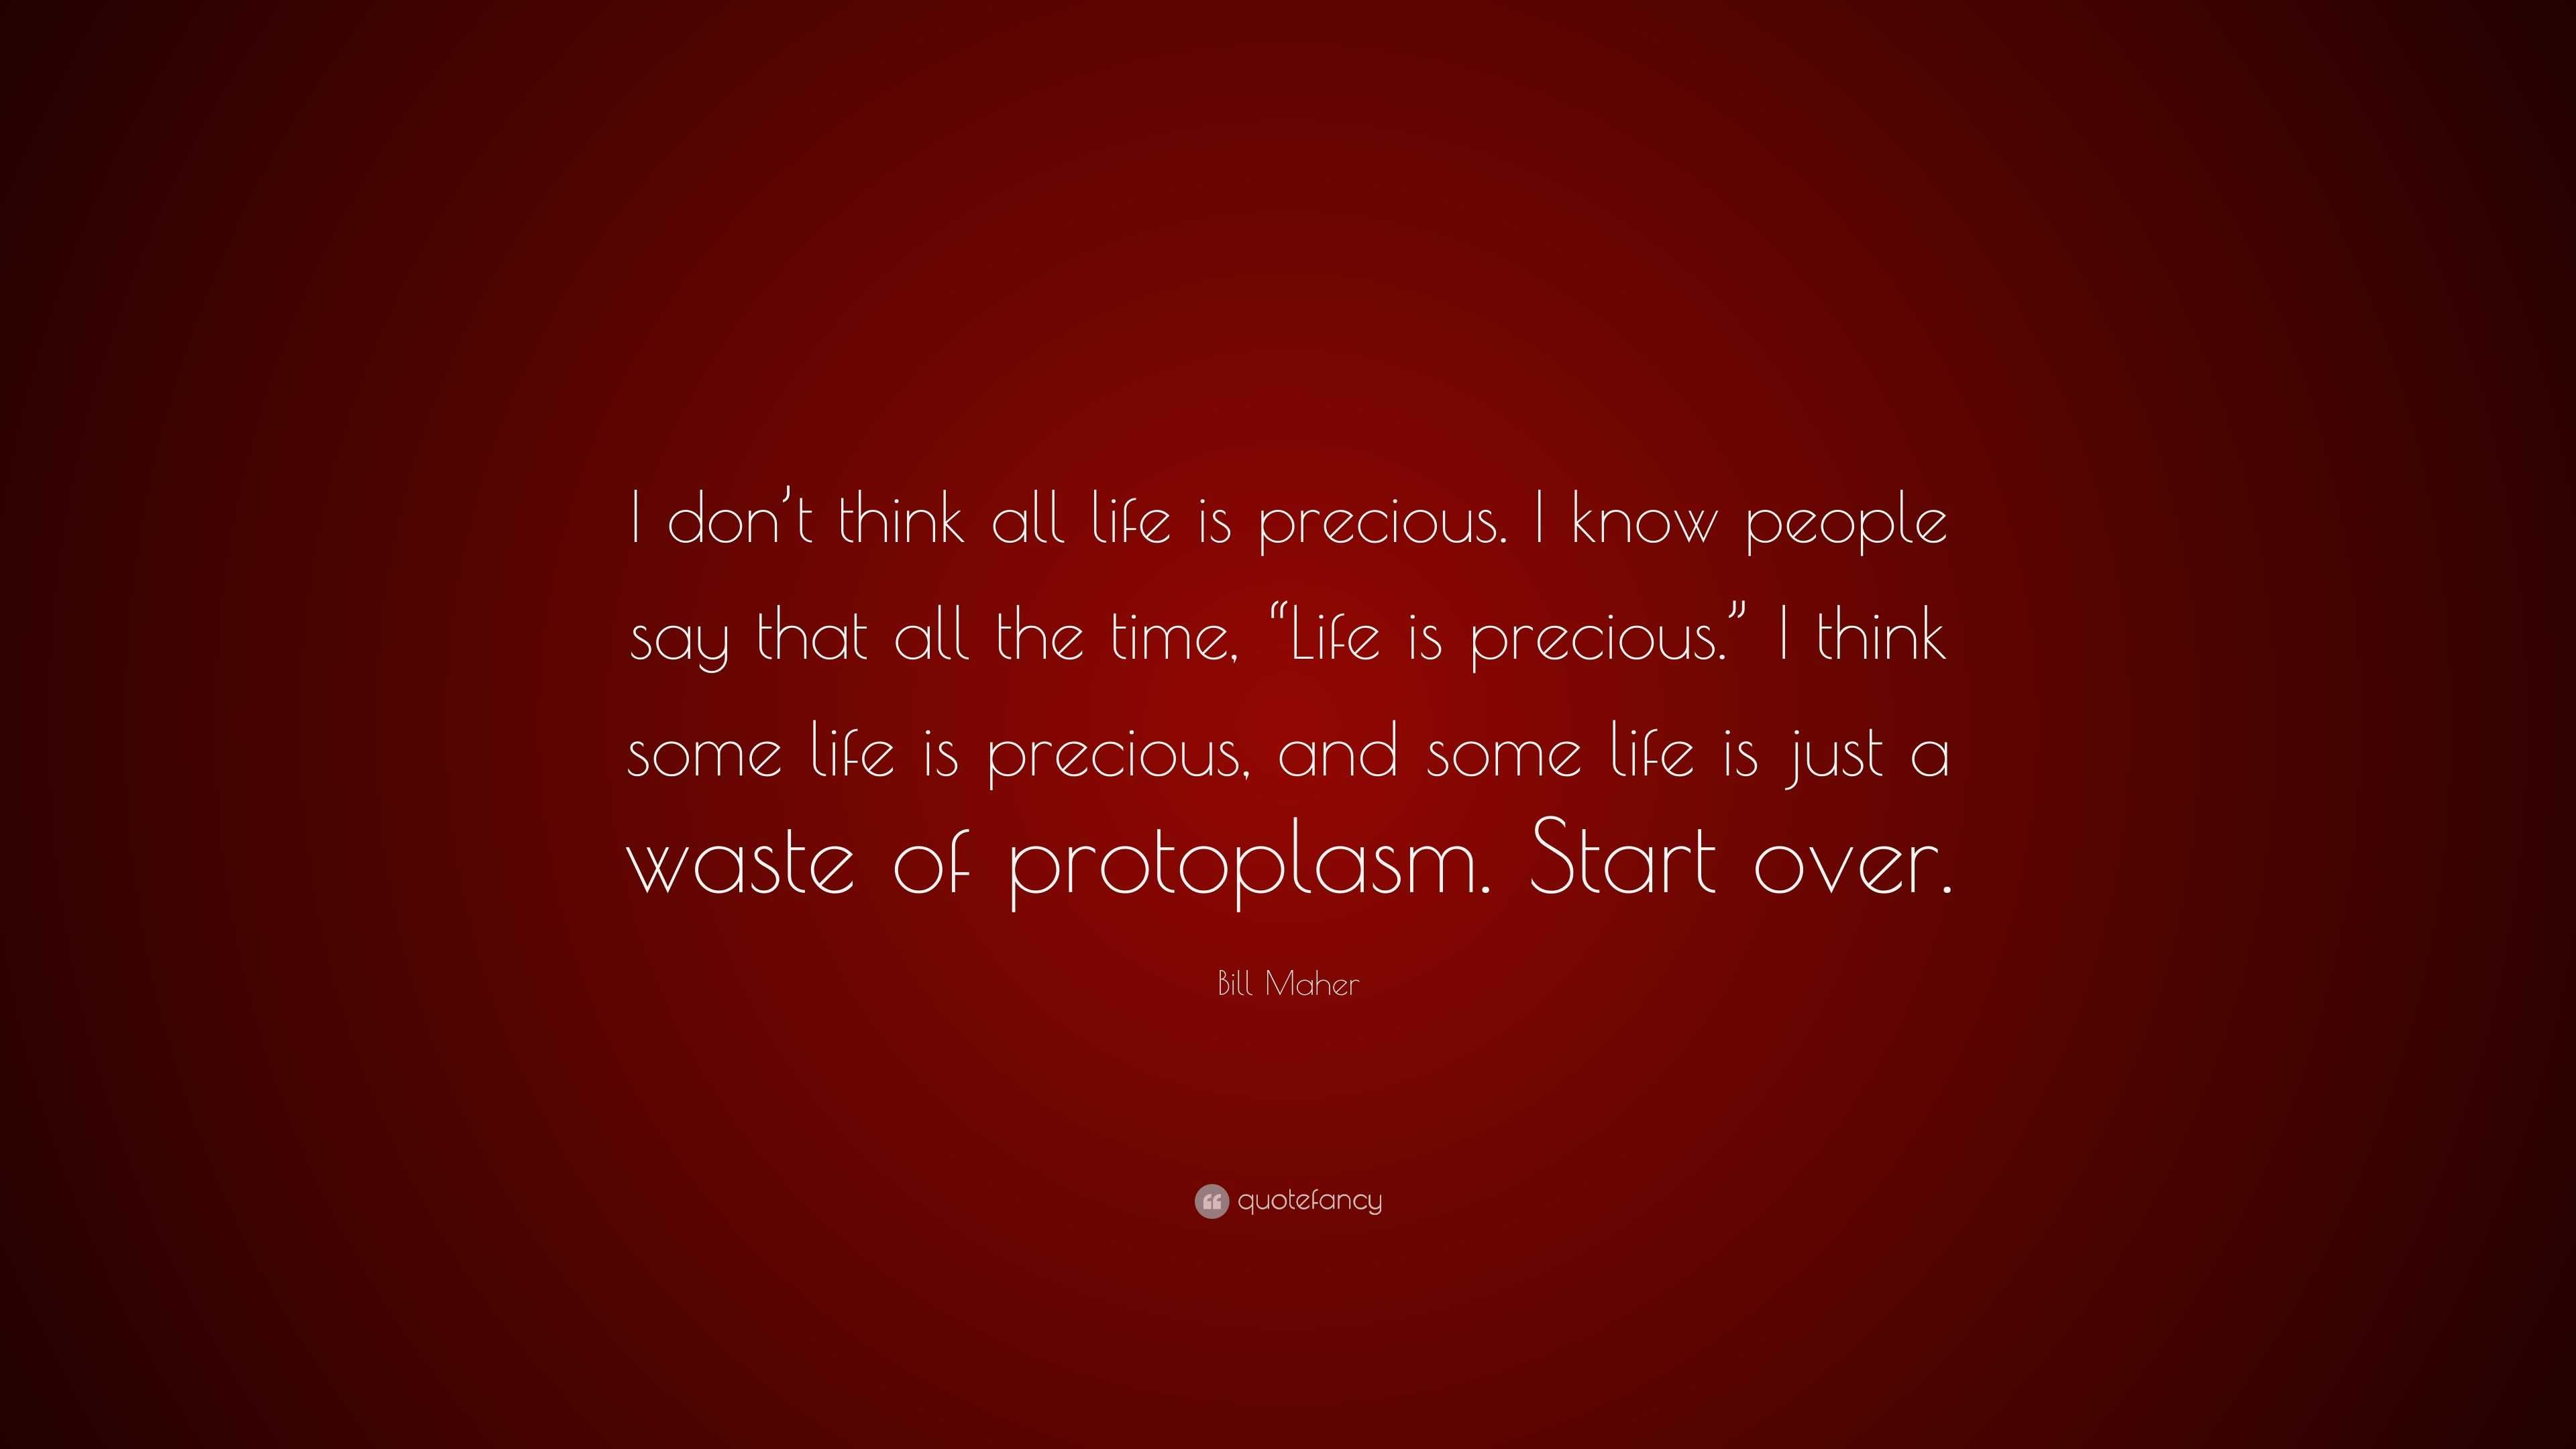 Bill Maher Quote: "I don't think all life is precious. I know people say that all the time ...